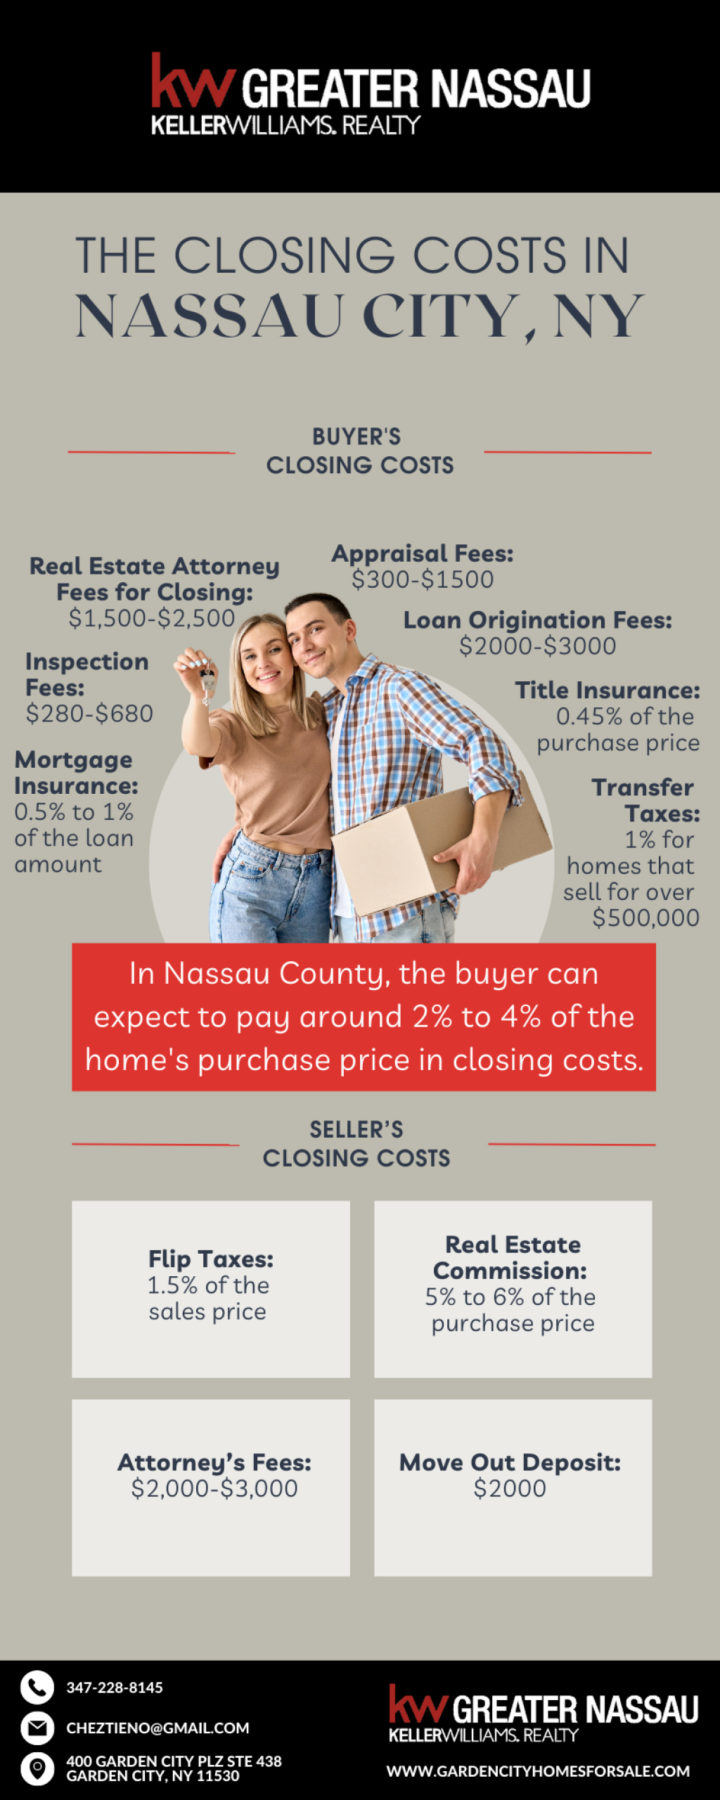 Closing Costs in Nassau County, NY